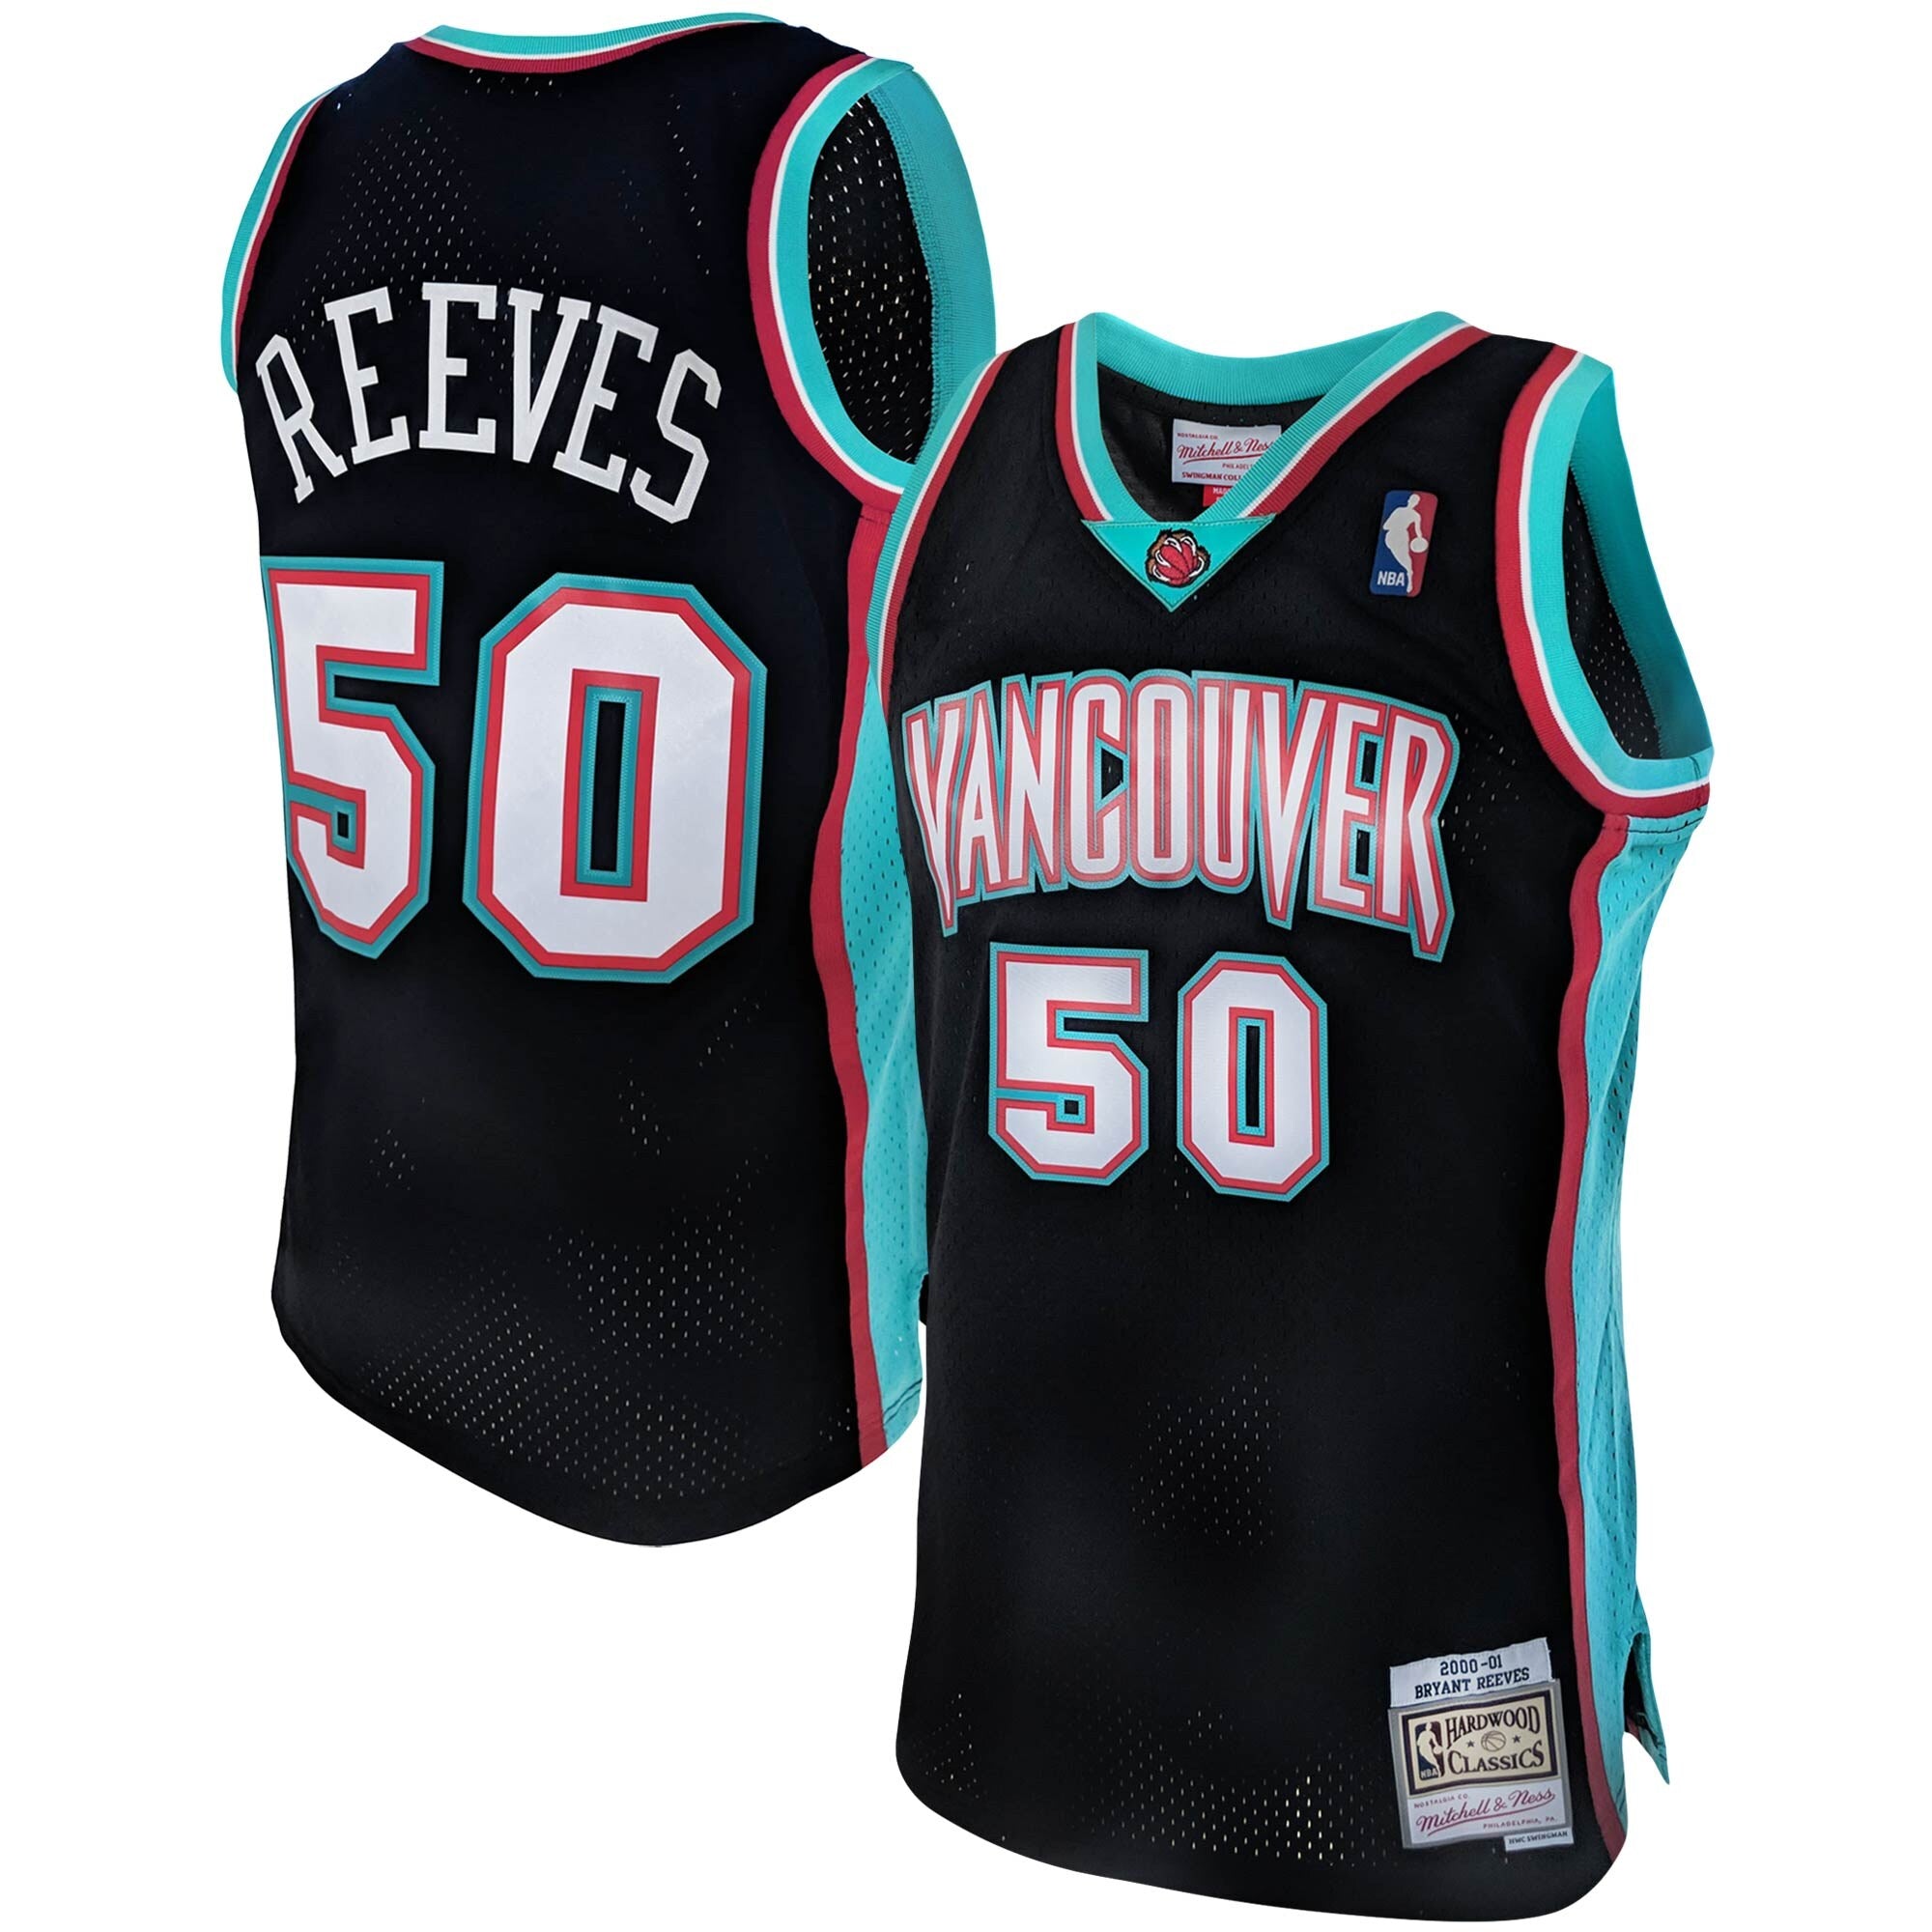 Vancouver Grizzlies Bryant Reeves Big Country signature shirt